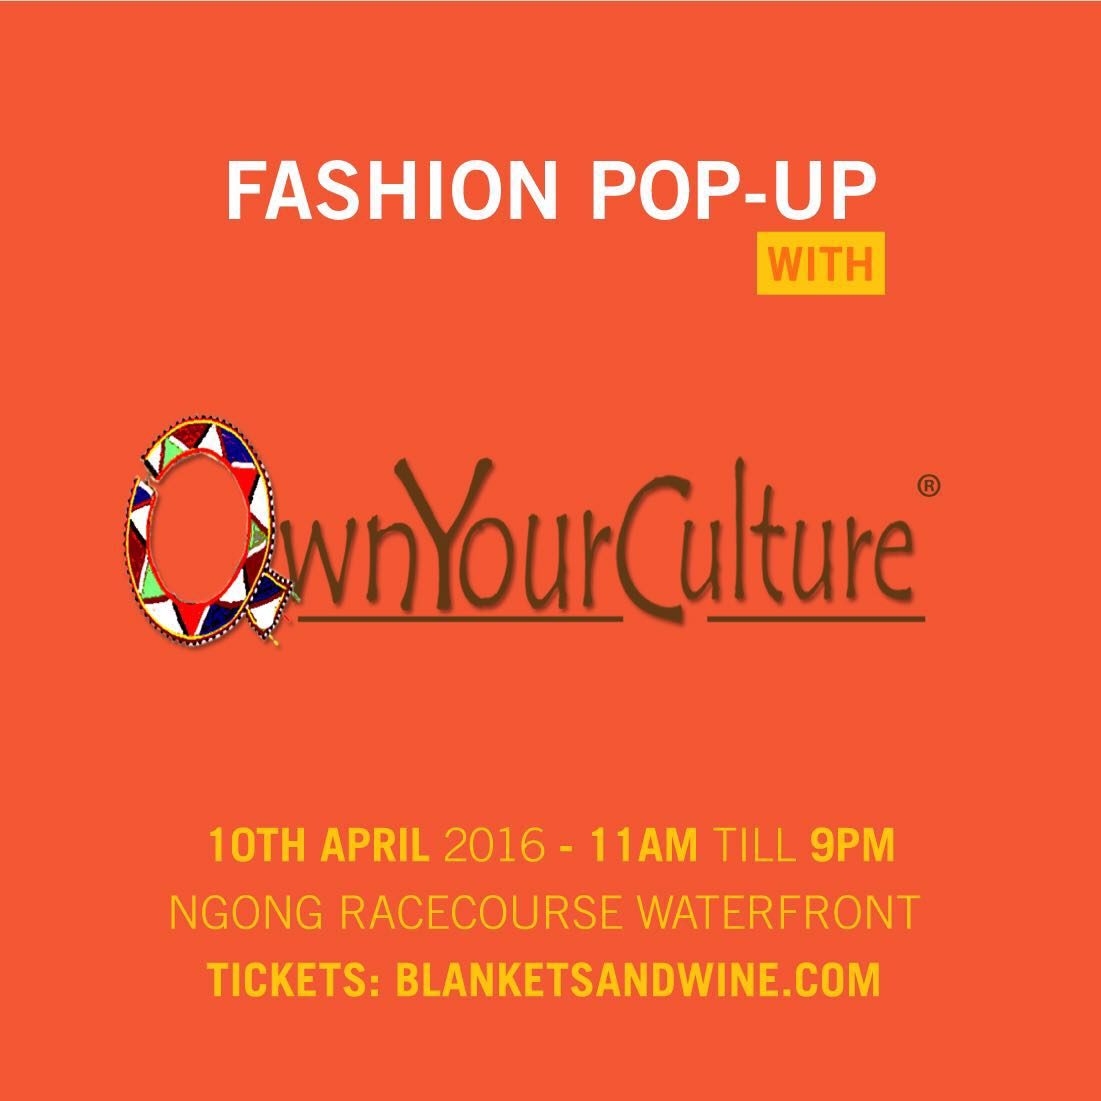 #OwnYourCulture for Blankets&Wine